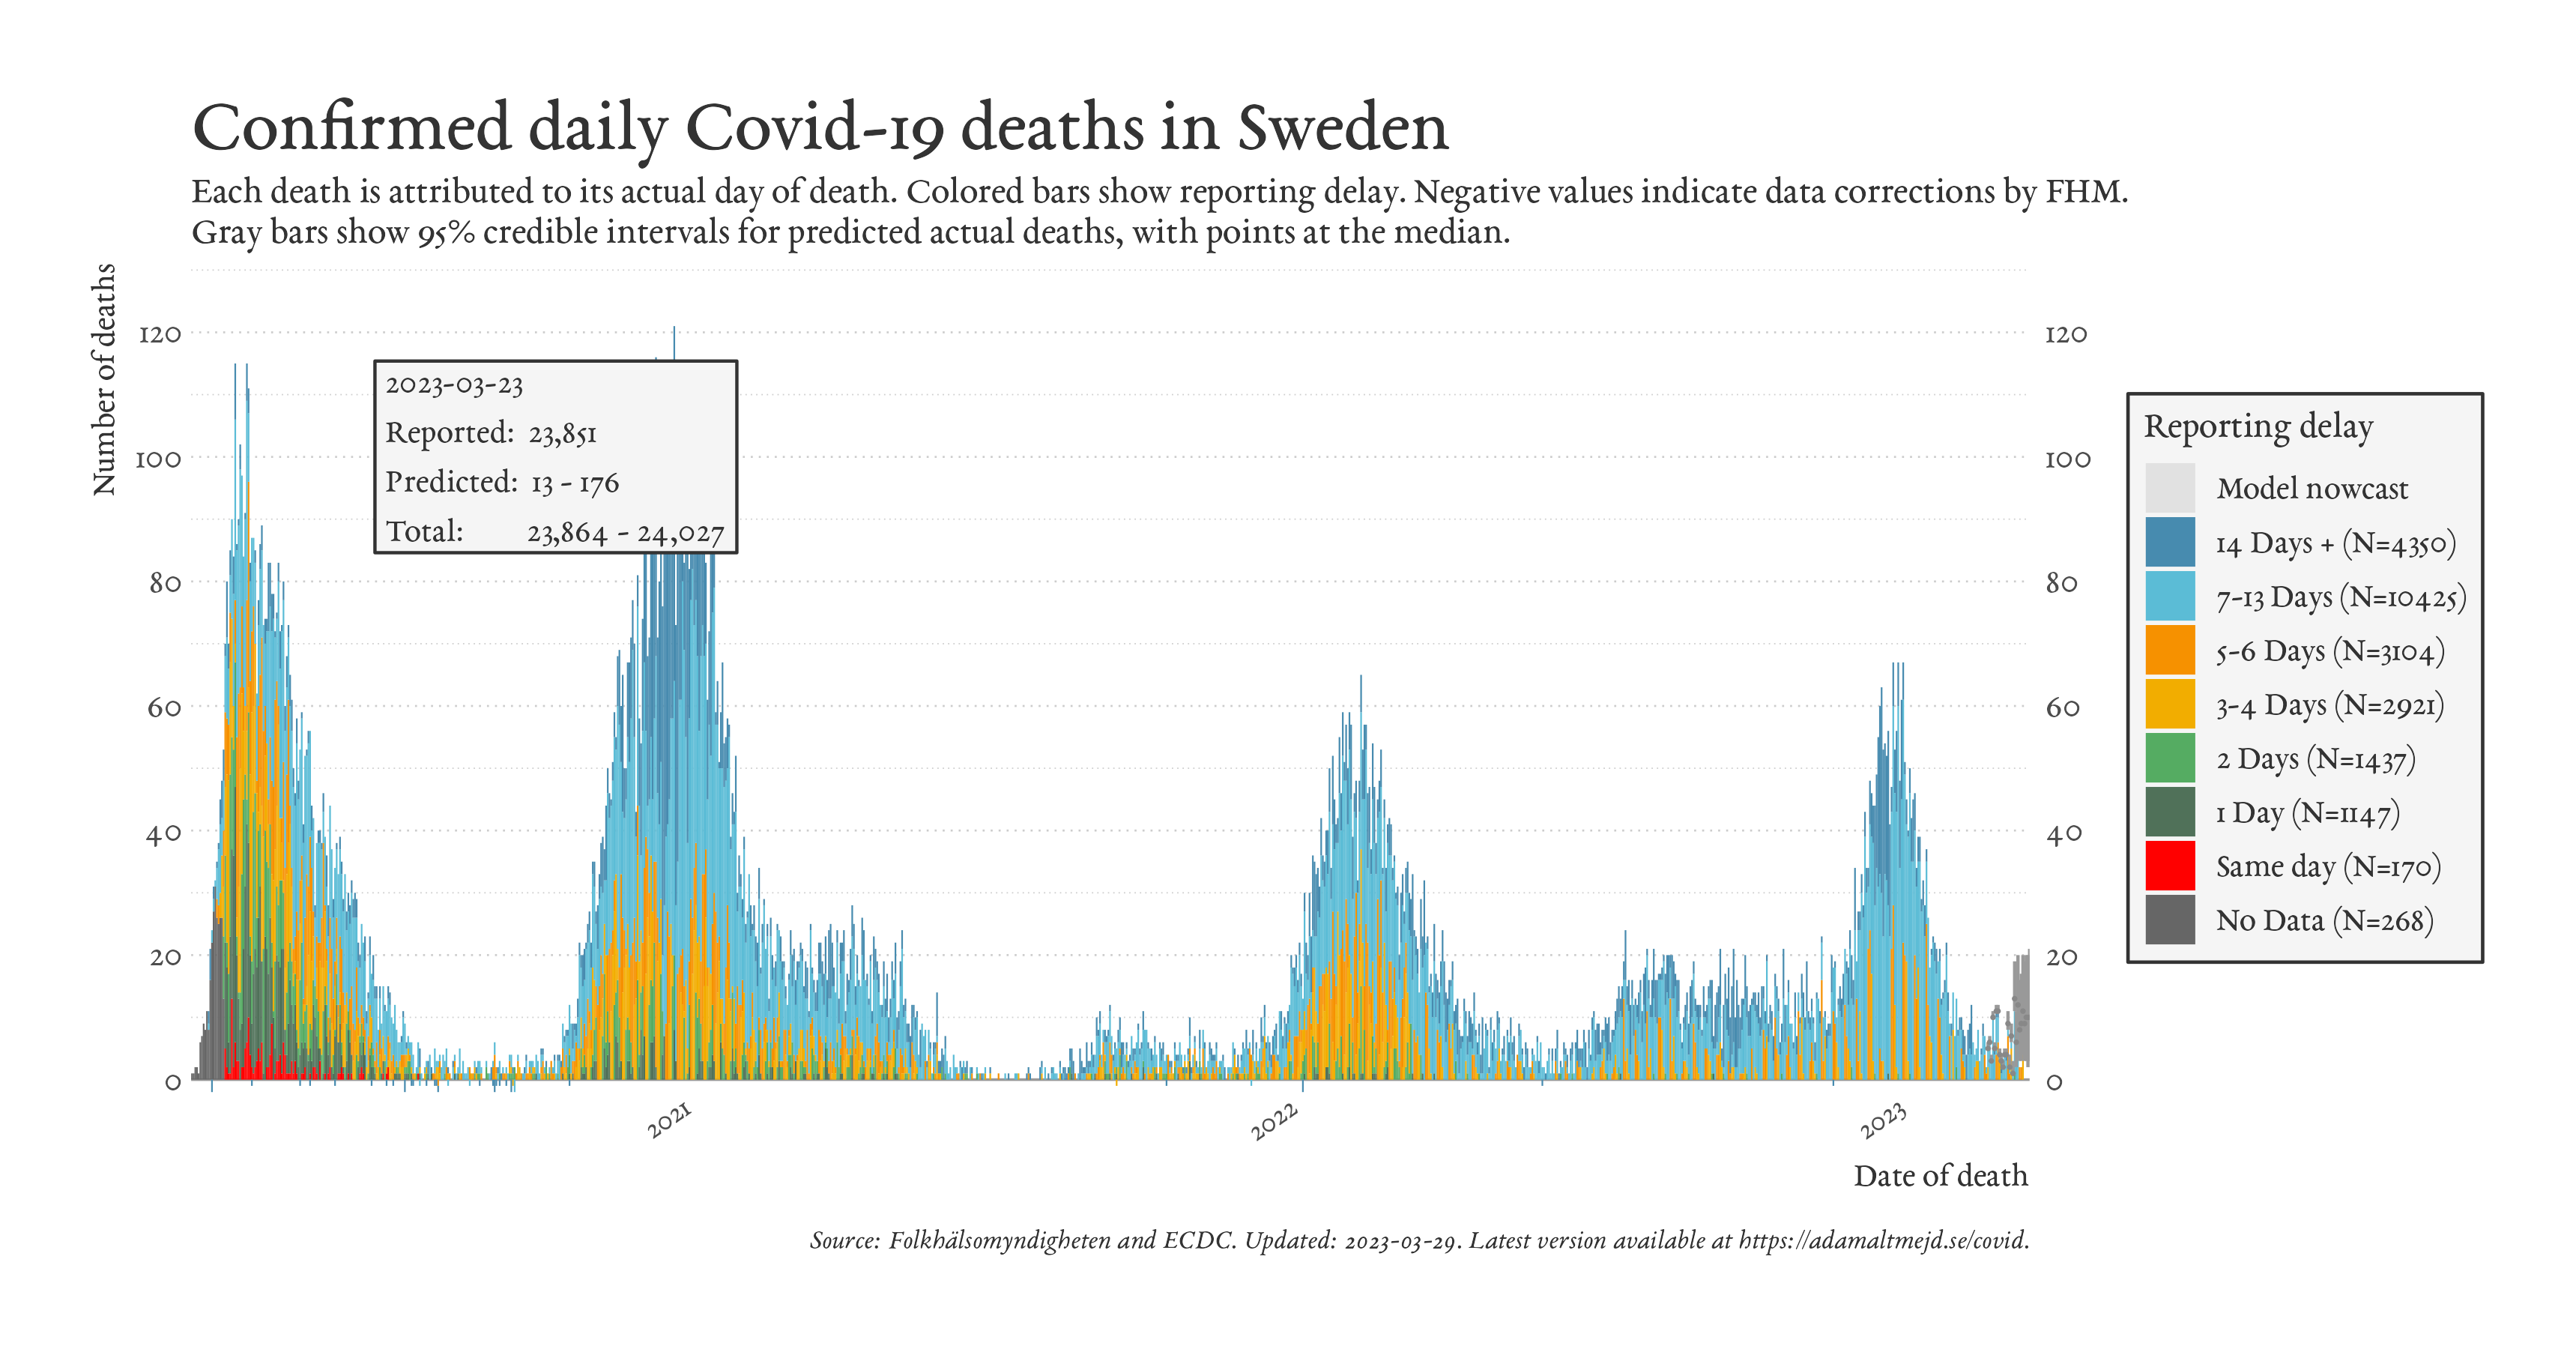 Covid-19 deaths in Sweden